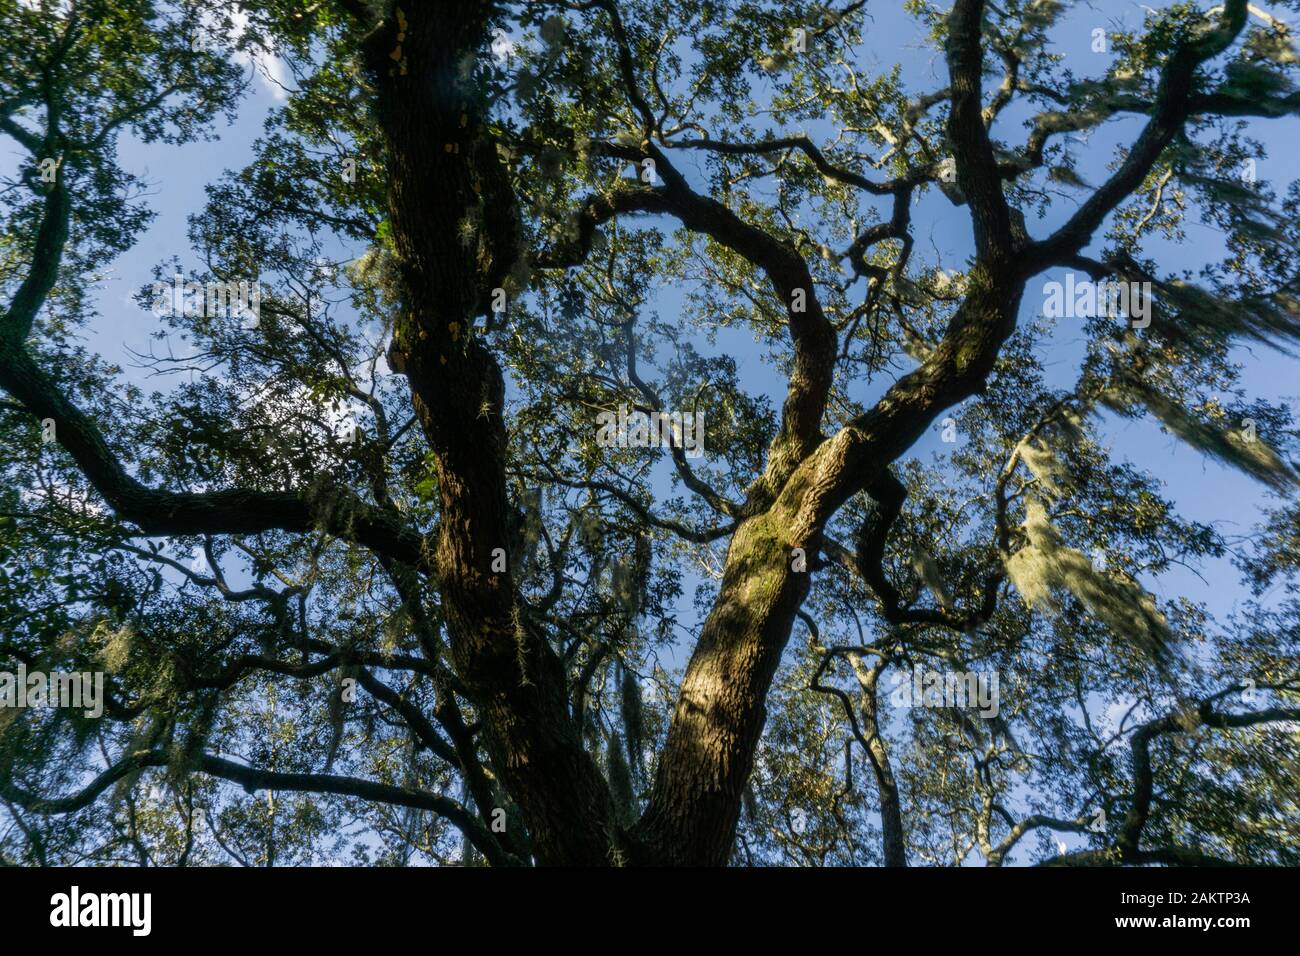 The live oaks is Savannah’s favorite tree, ornamenting streets, parks and cemeteries across the city. Stock Photo